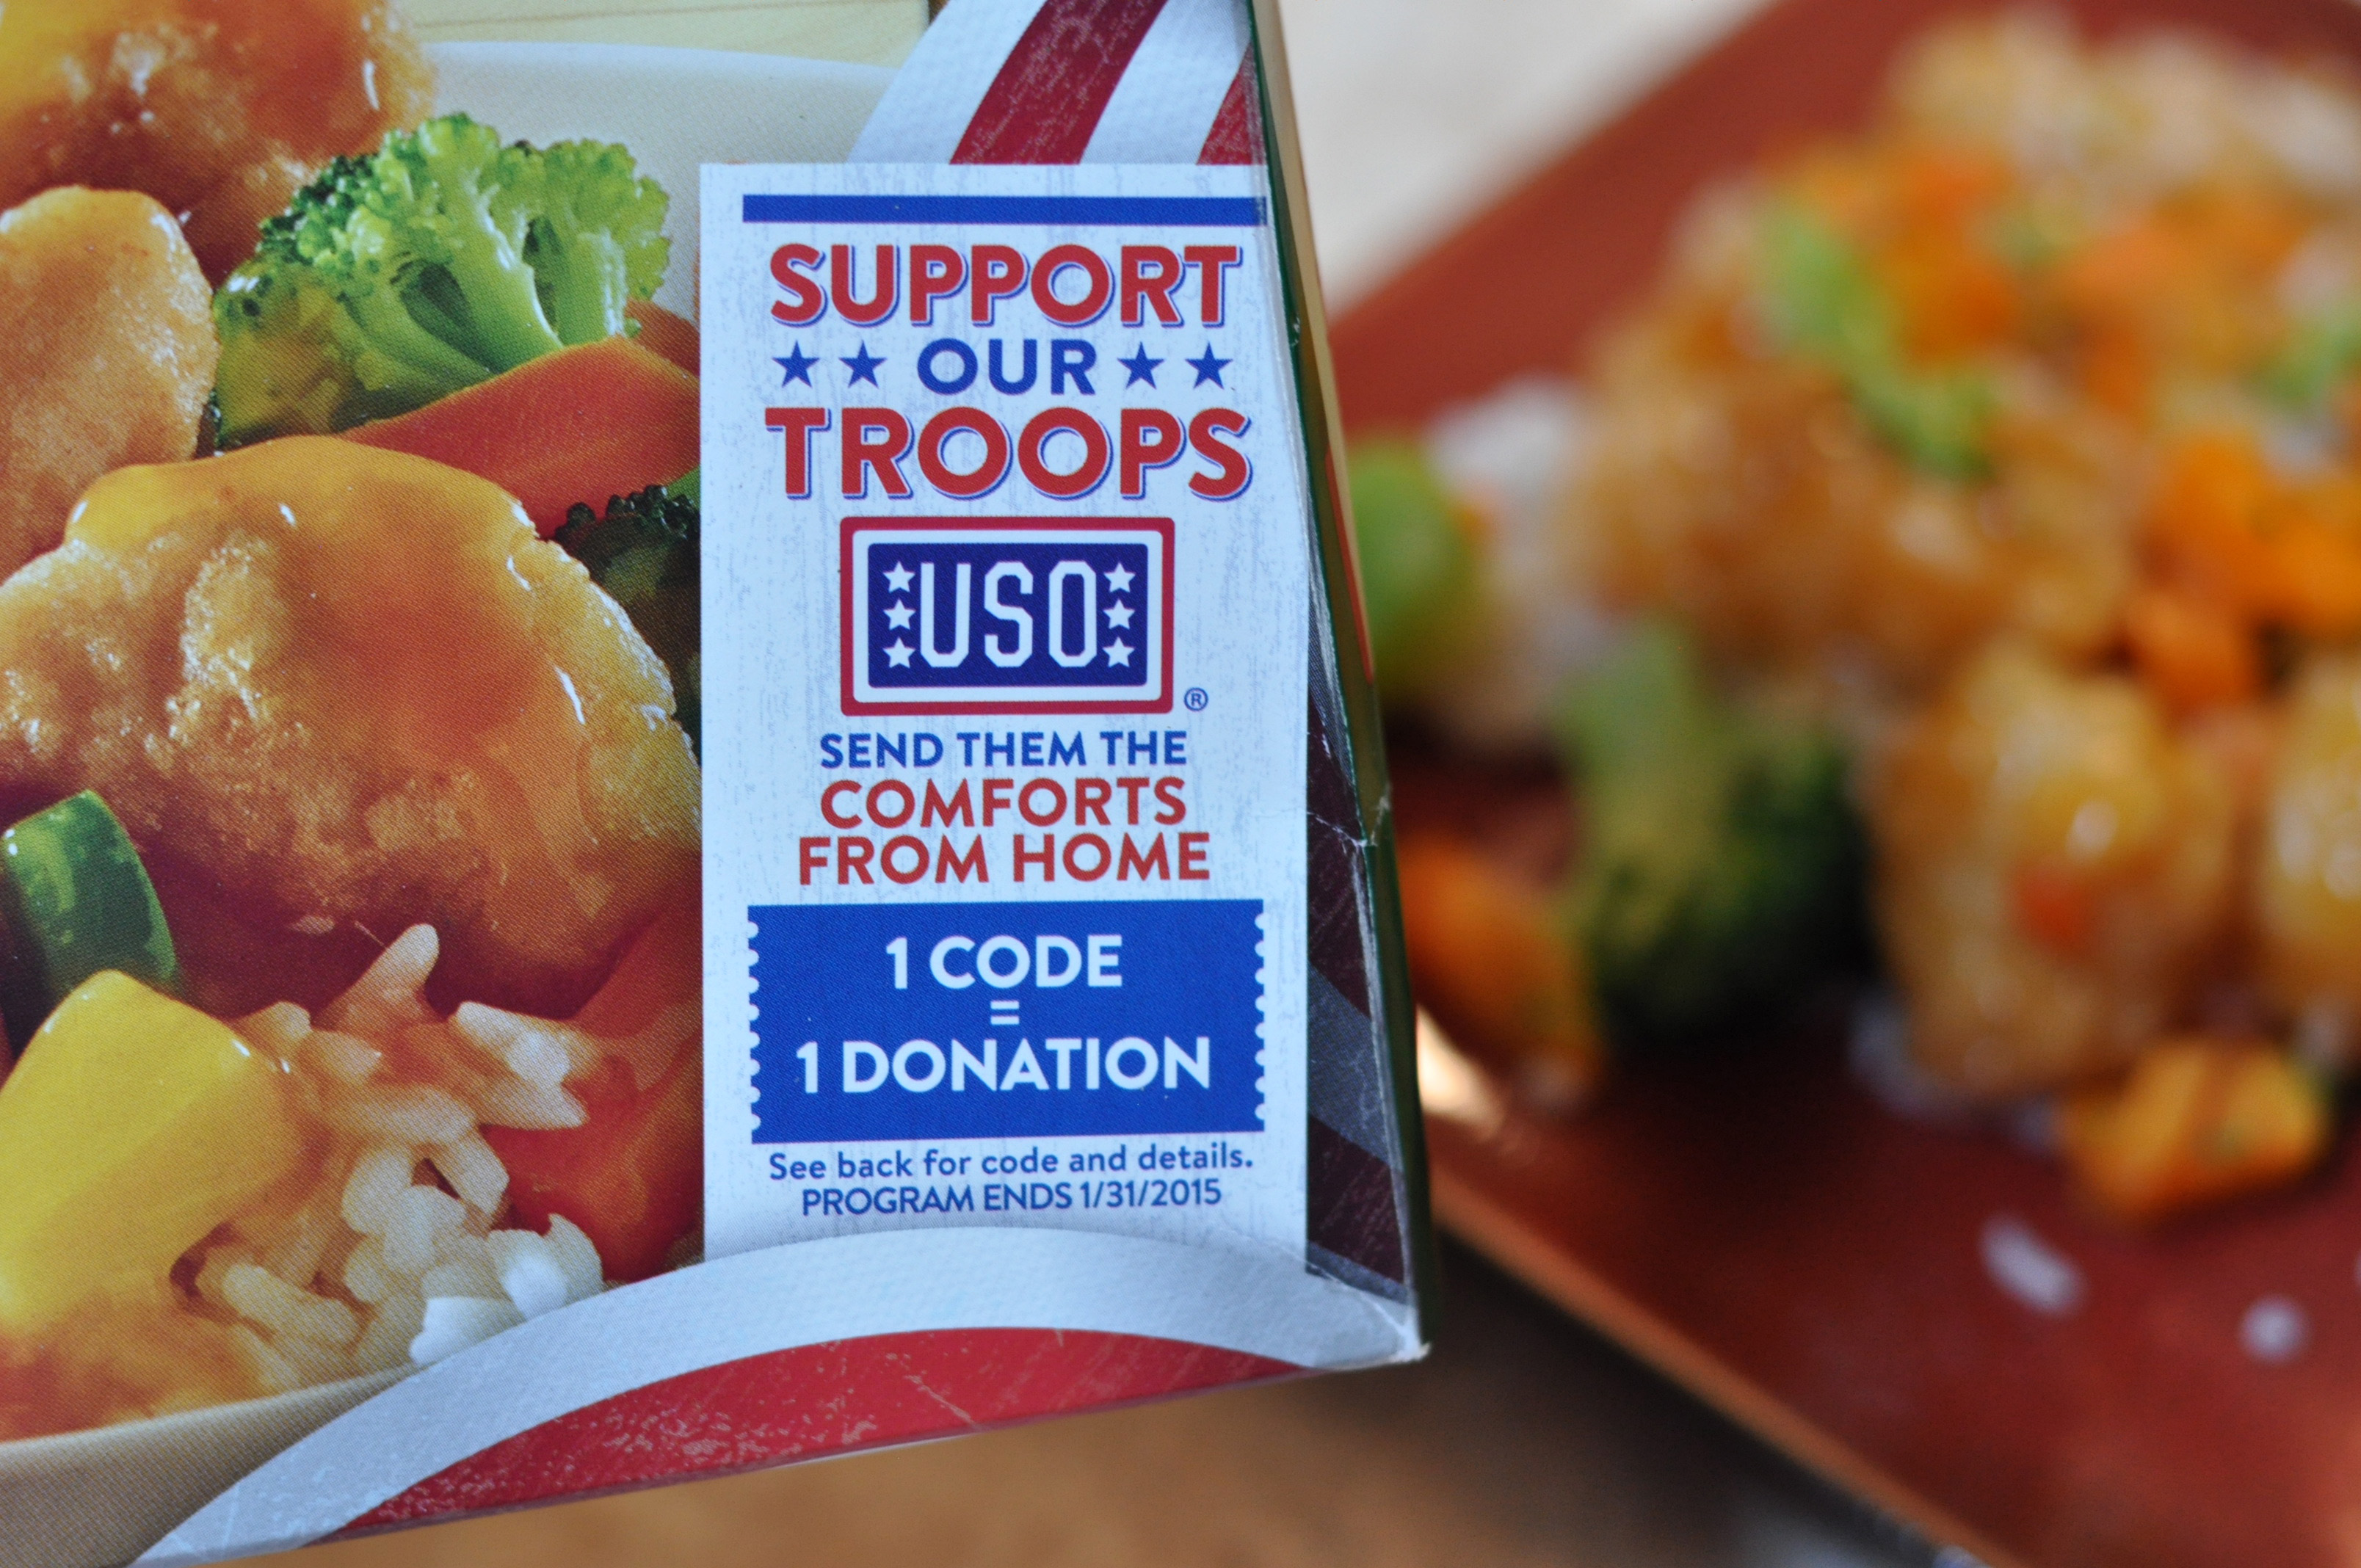 Marie Callender's Partners with USO To Provide Comforts from Home